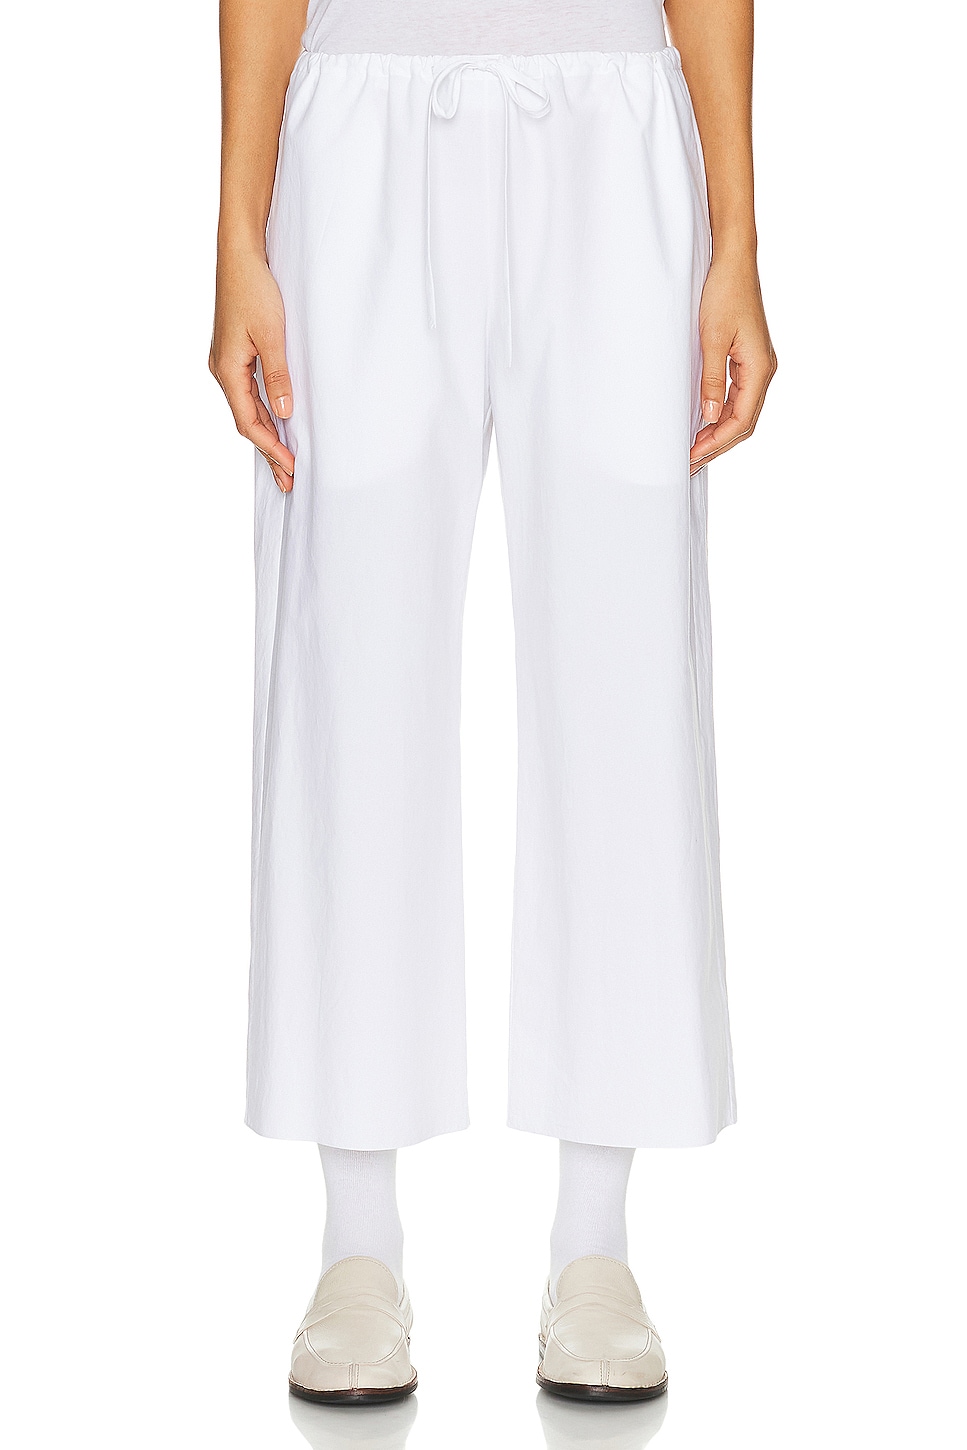 Image 1 of The Row Jubin Pant in OFF WHITE